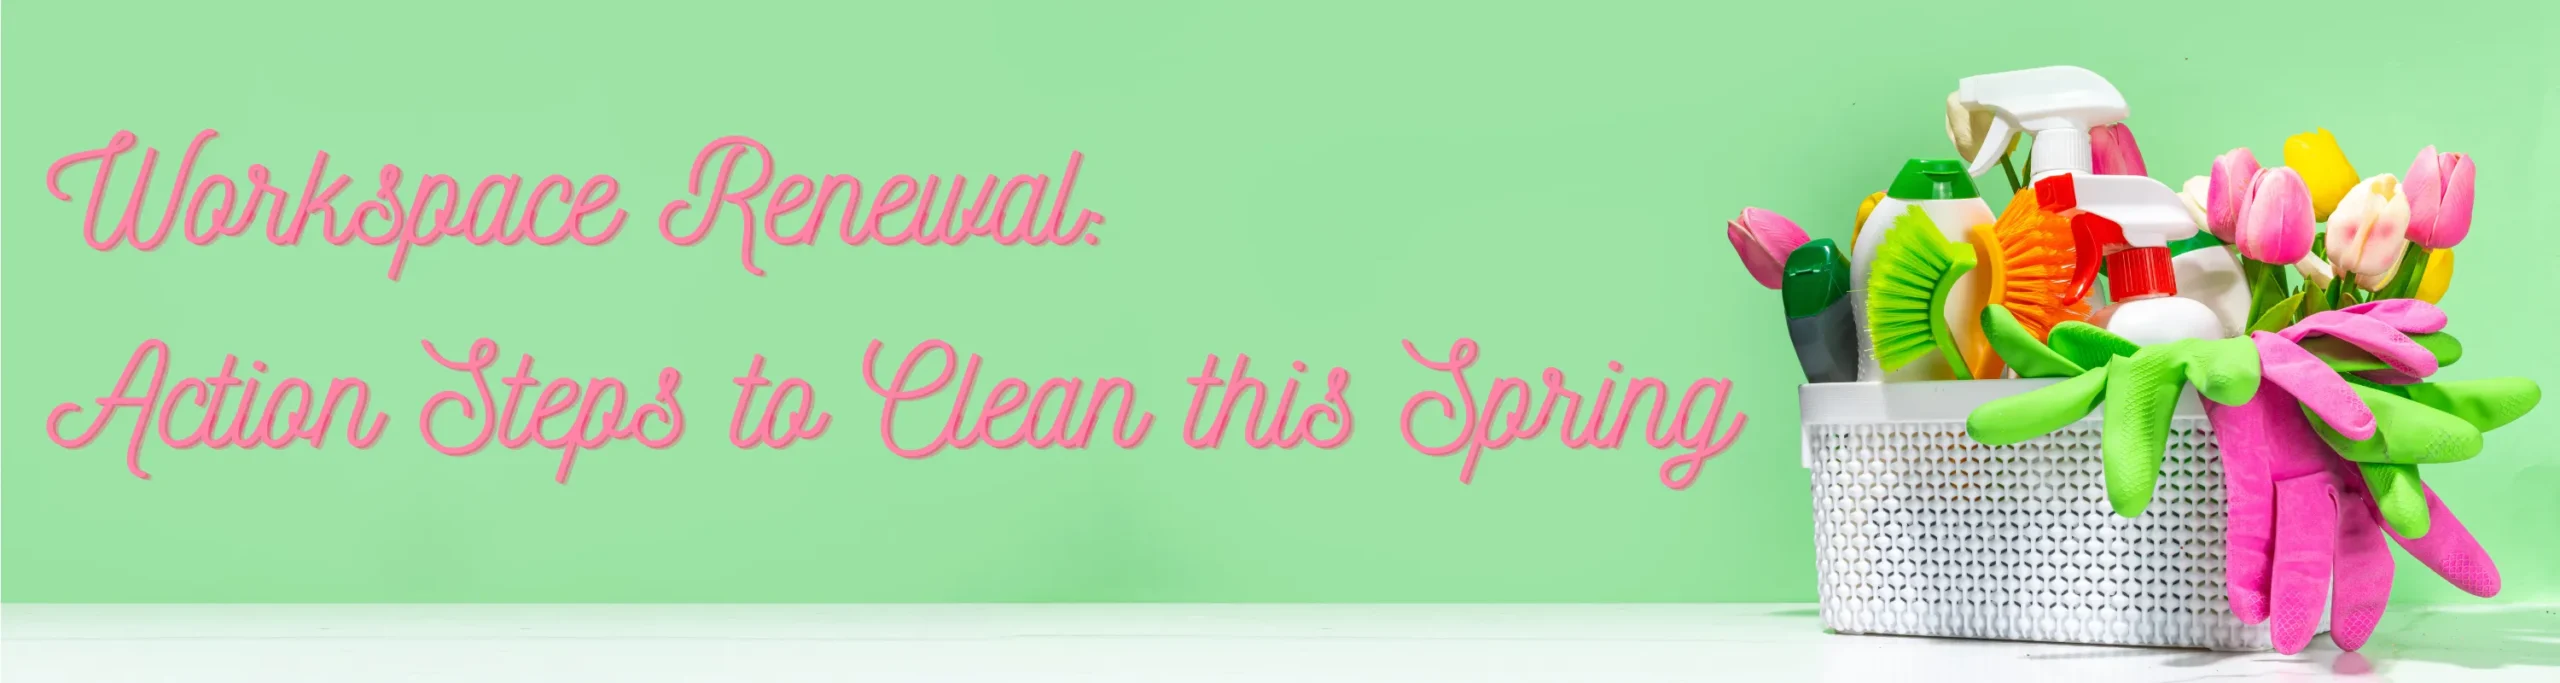 Workspace Renewal Action Steps to Clean this Spring Blog Banner